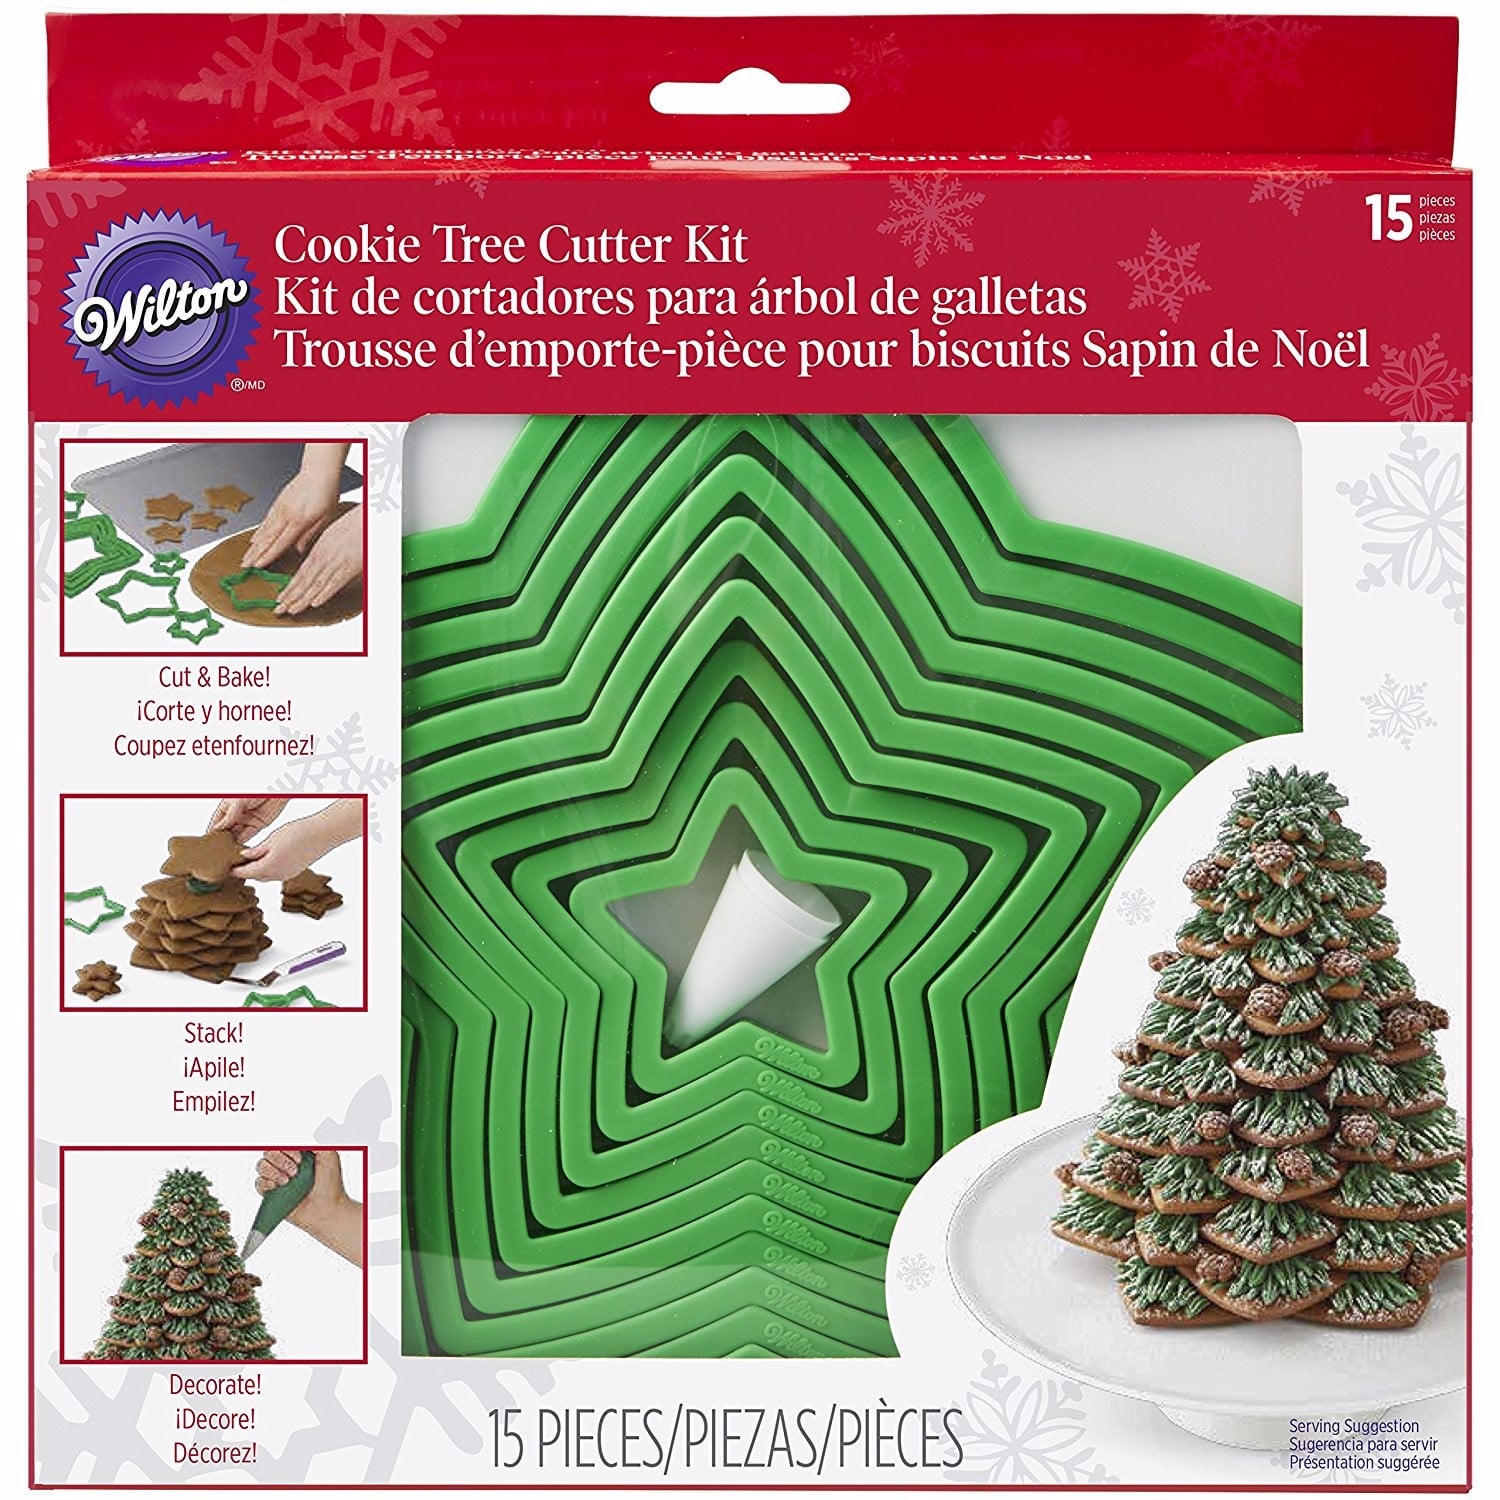 CHRISTMAS 3-D COOKIE KIT MAKE YOUR OWN TREE & SNOWMAN SET CUTTERS & RECIPES 